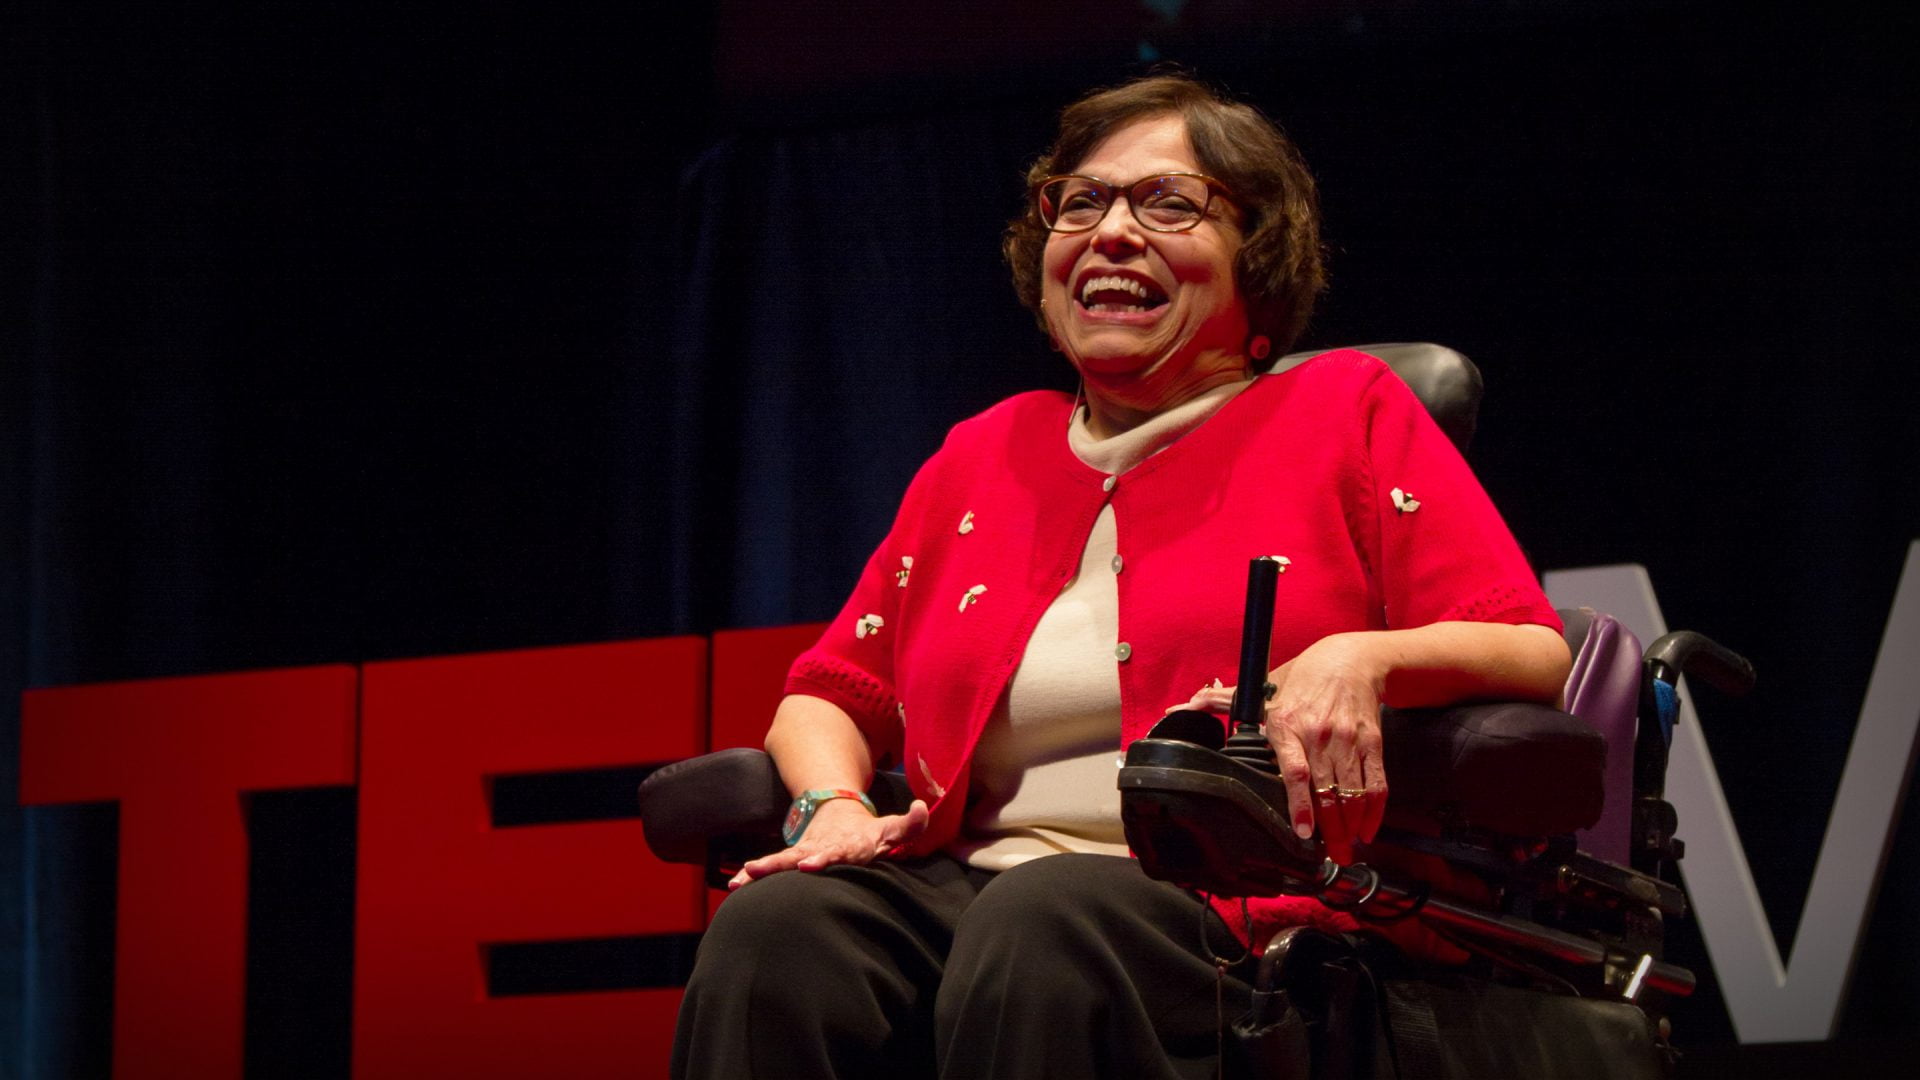 Judy Heumann Legacy on X: Next week join The Disability Inclusion team  @WorldBank for their Come Dance with the Stars event to celebrate the  International Day of Persons with Disabilities, taking place